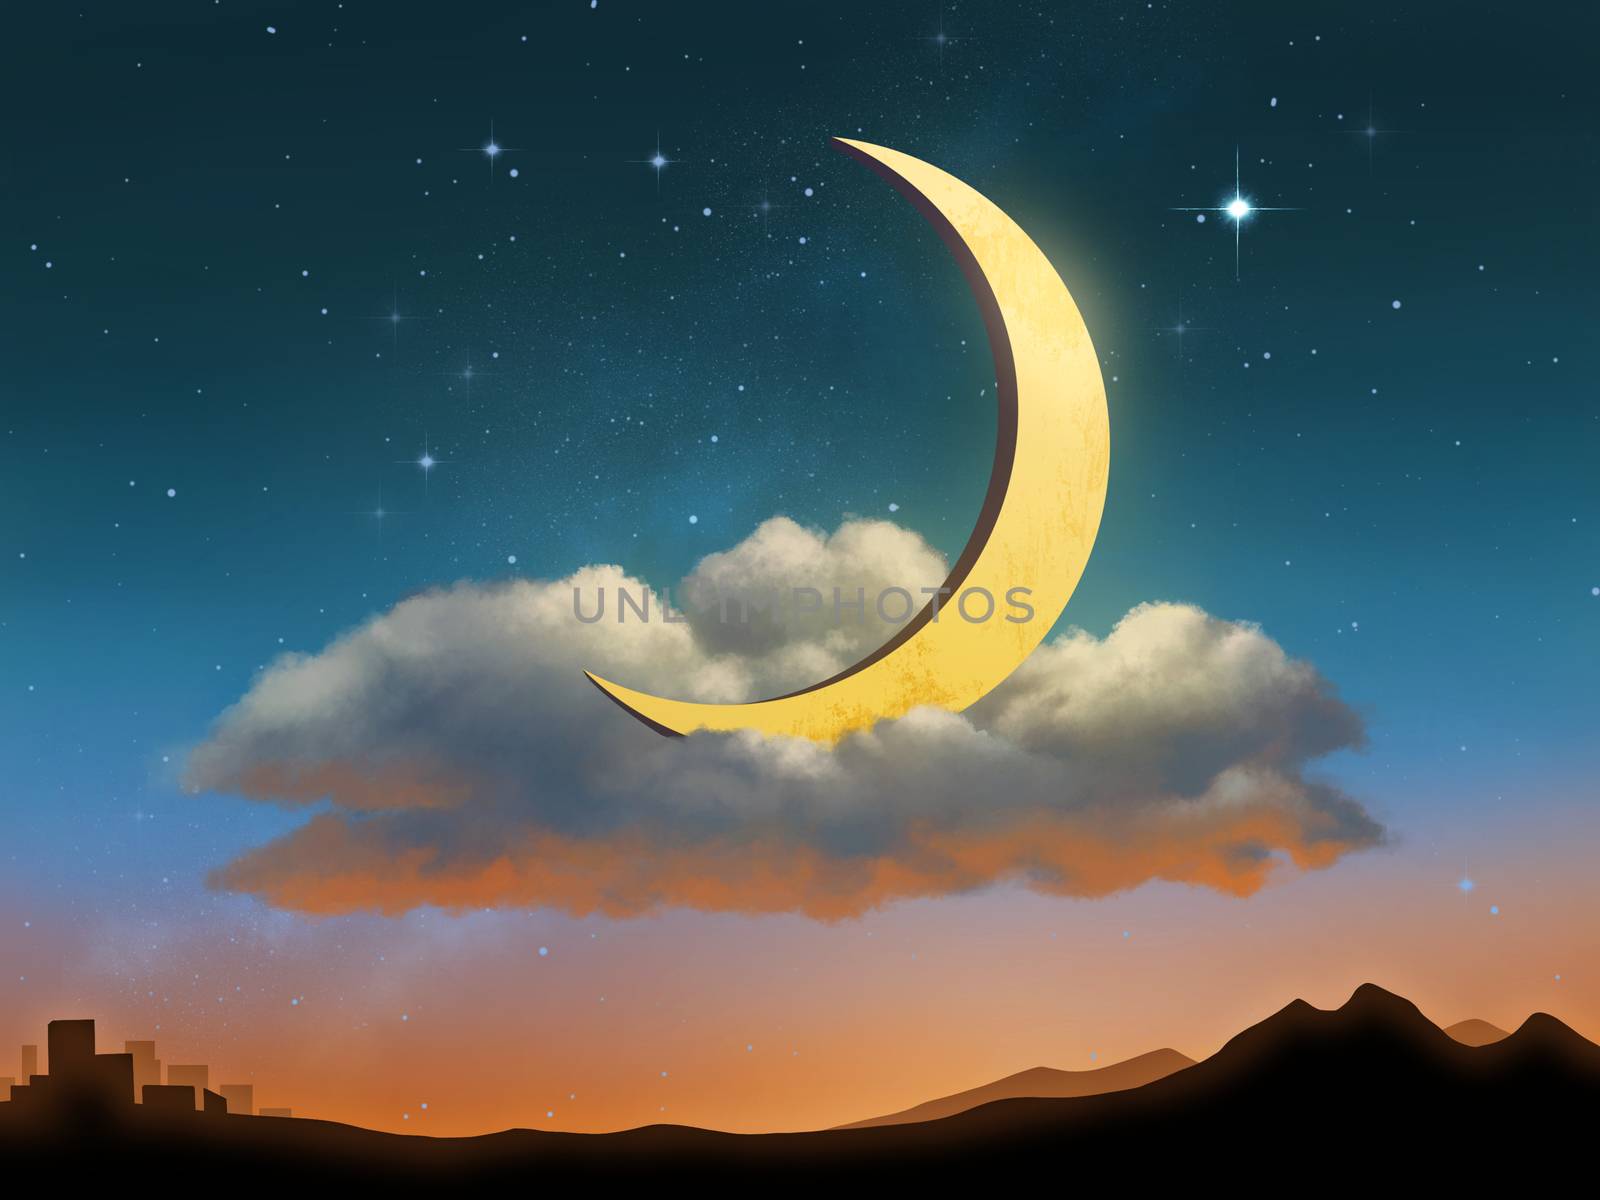 The Moon is resting on a cloud after the sunset. Digital illustration.